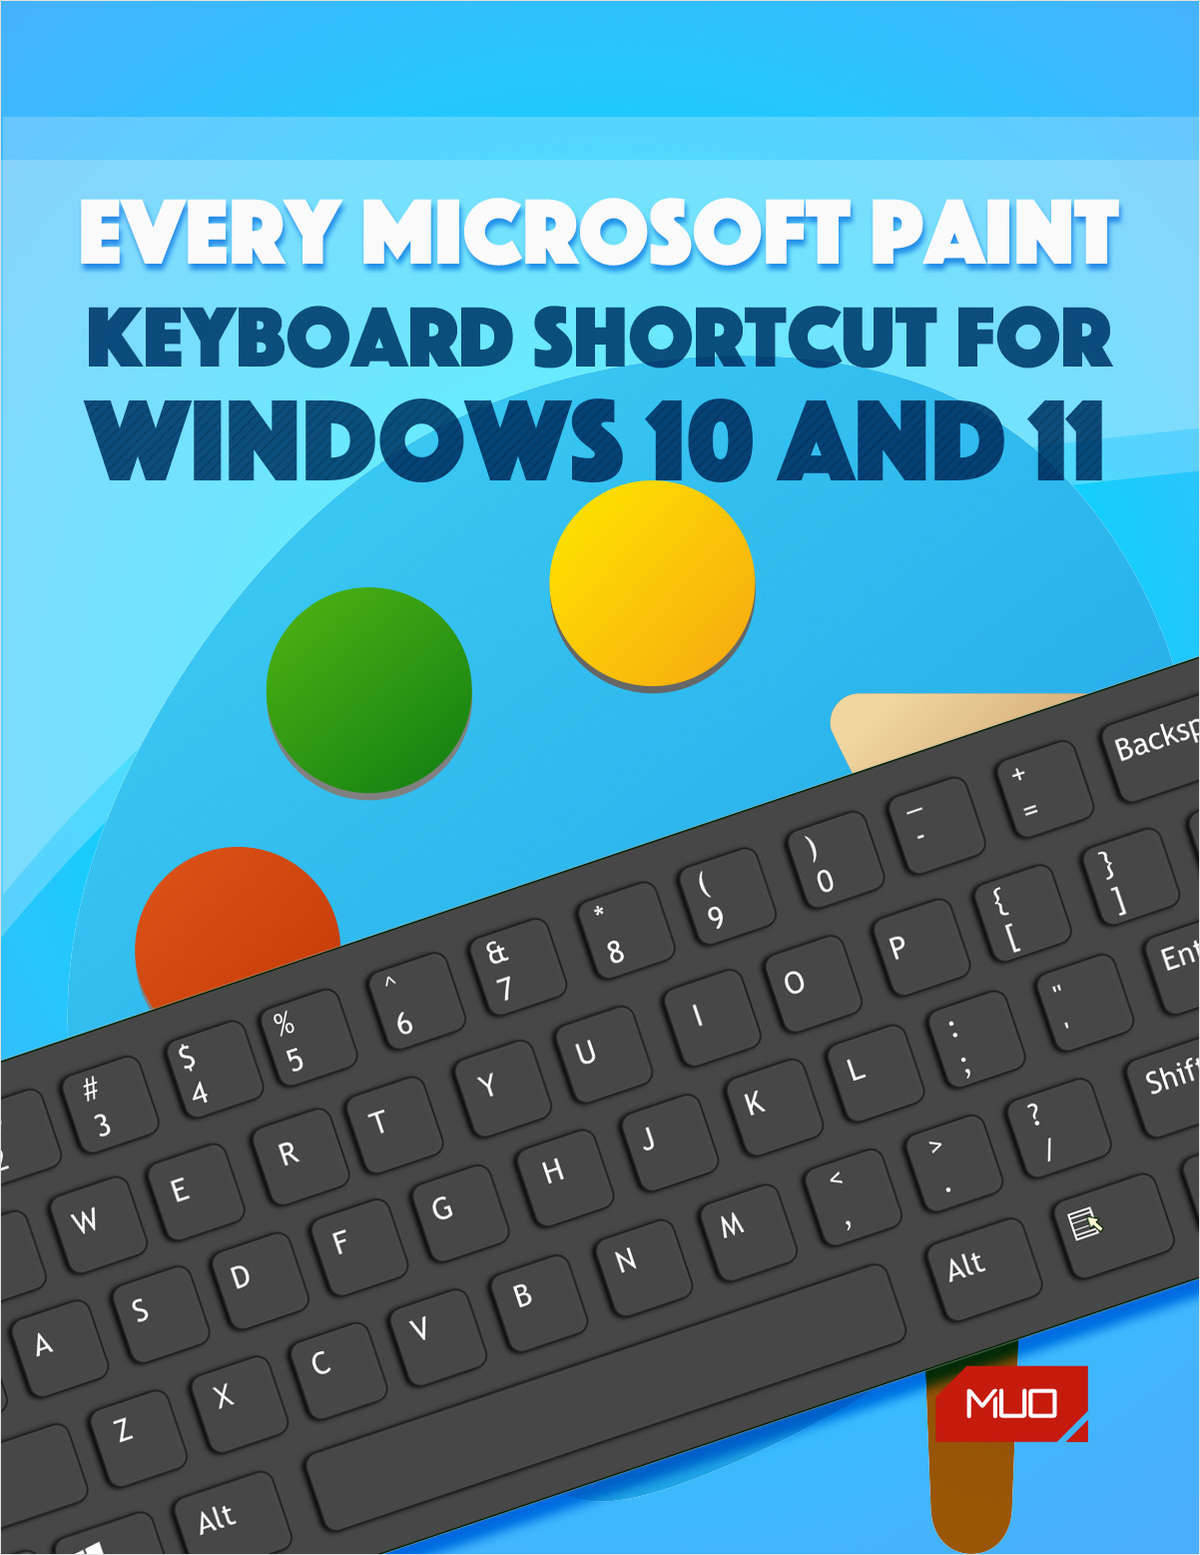 Every Microsoft Paint Keyboard Shortcut for Windows 10 and 11